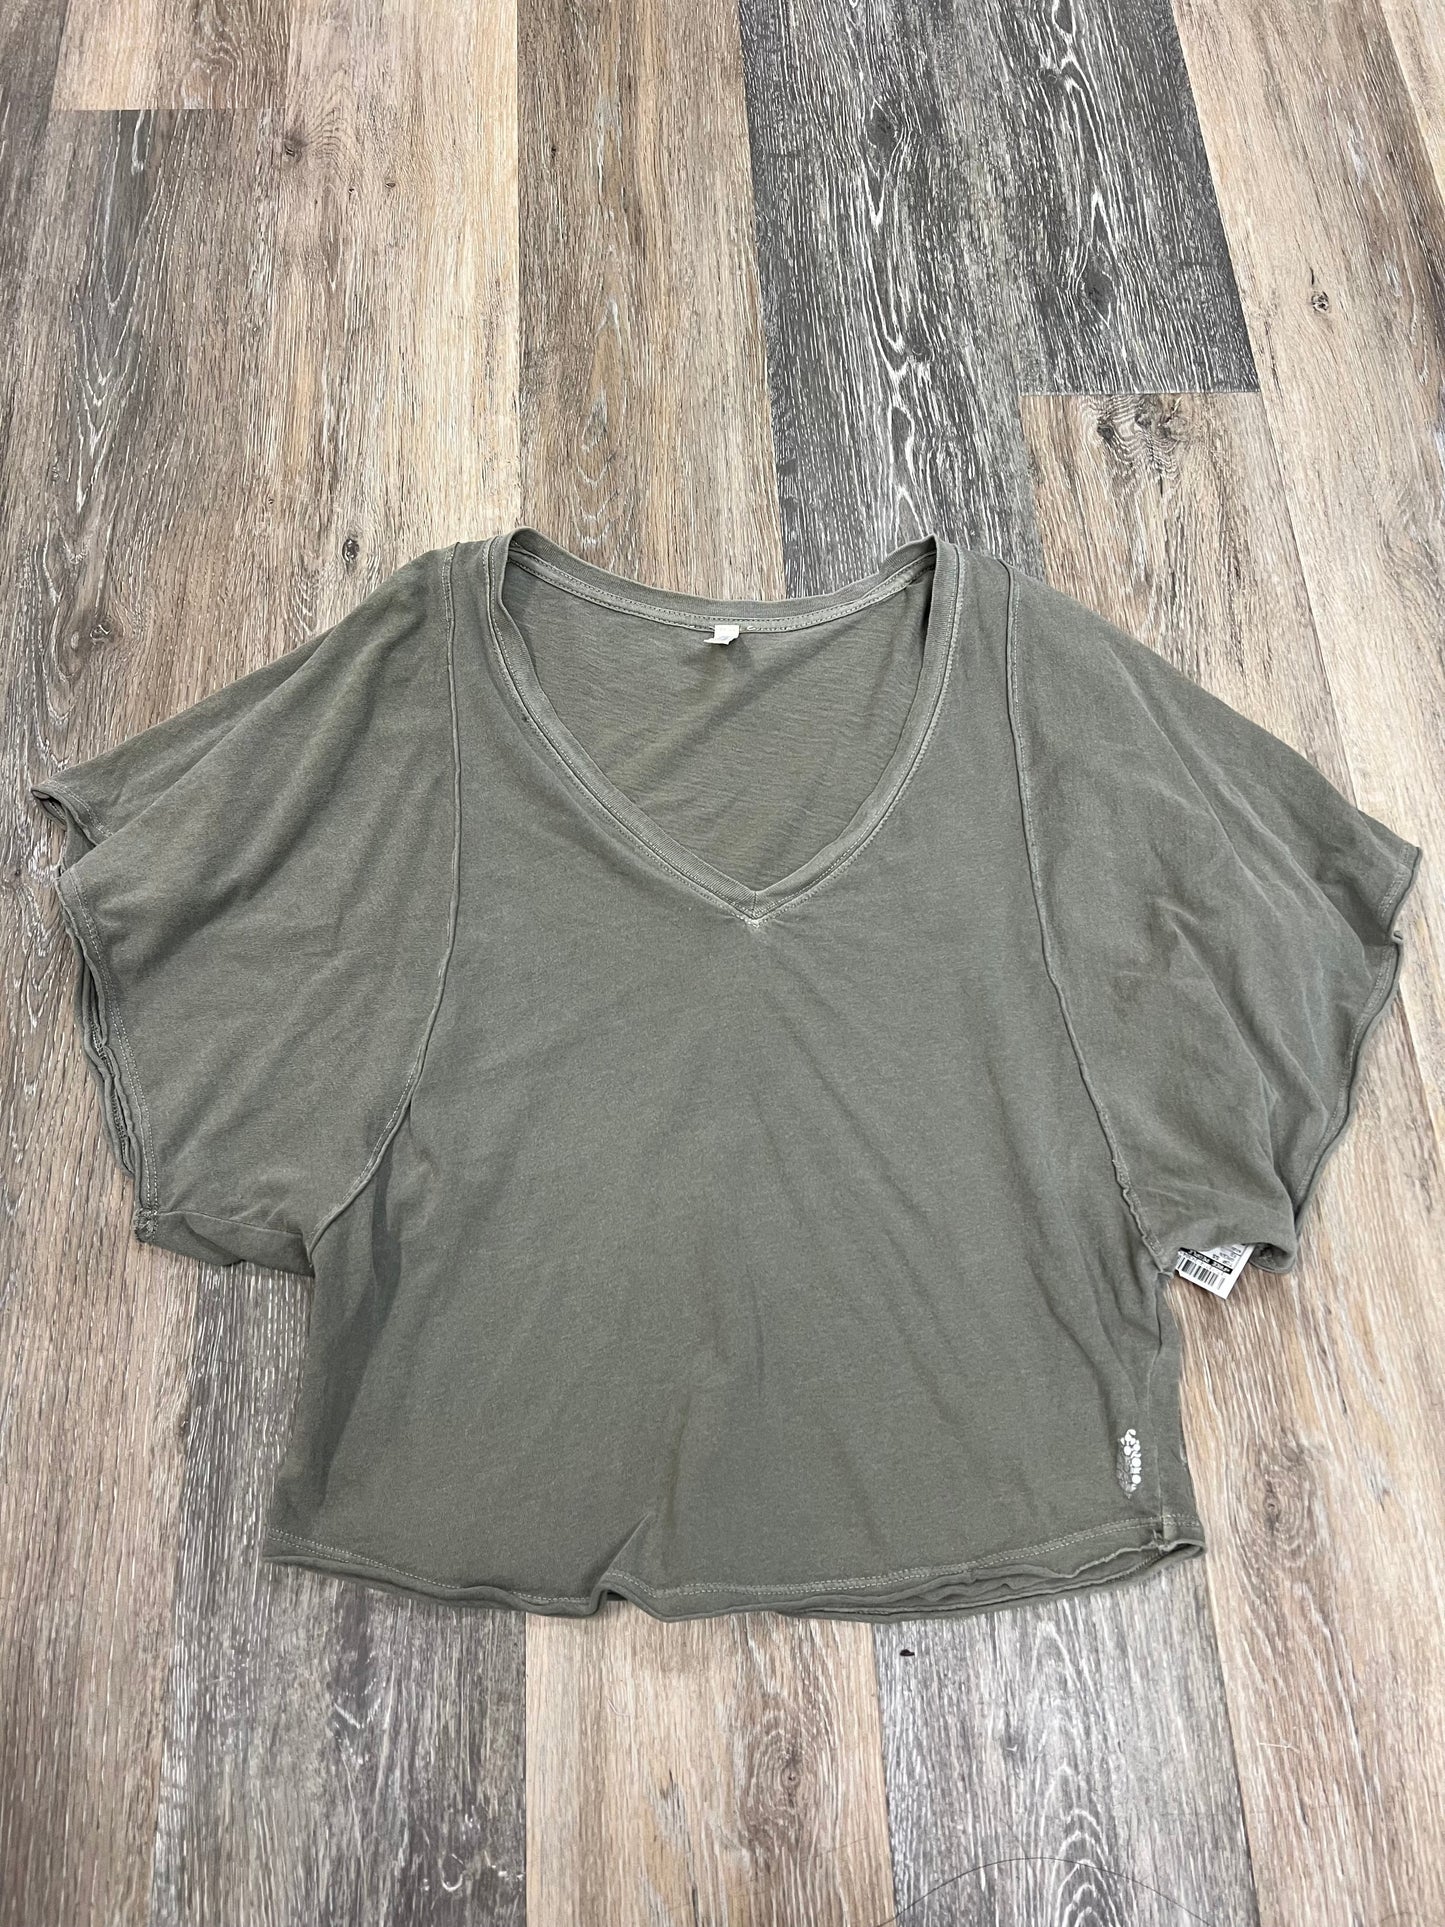 Green Top Short Sleeve Free People, Size Xs